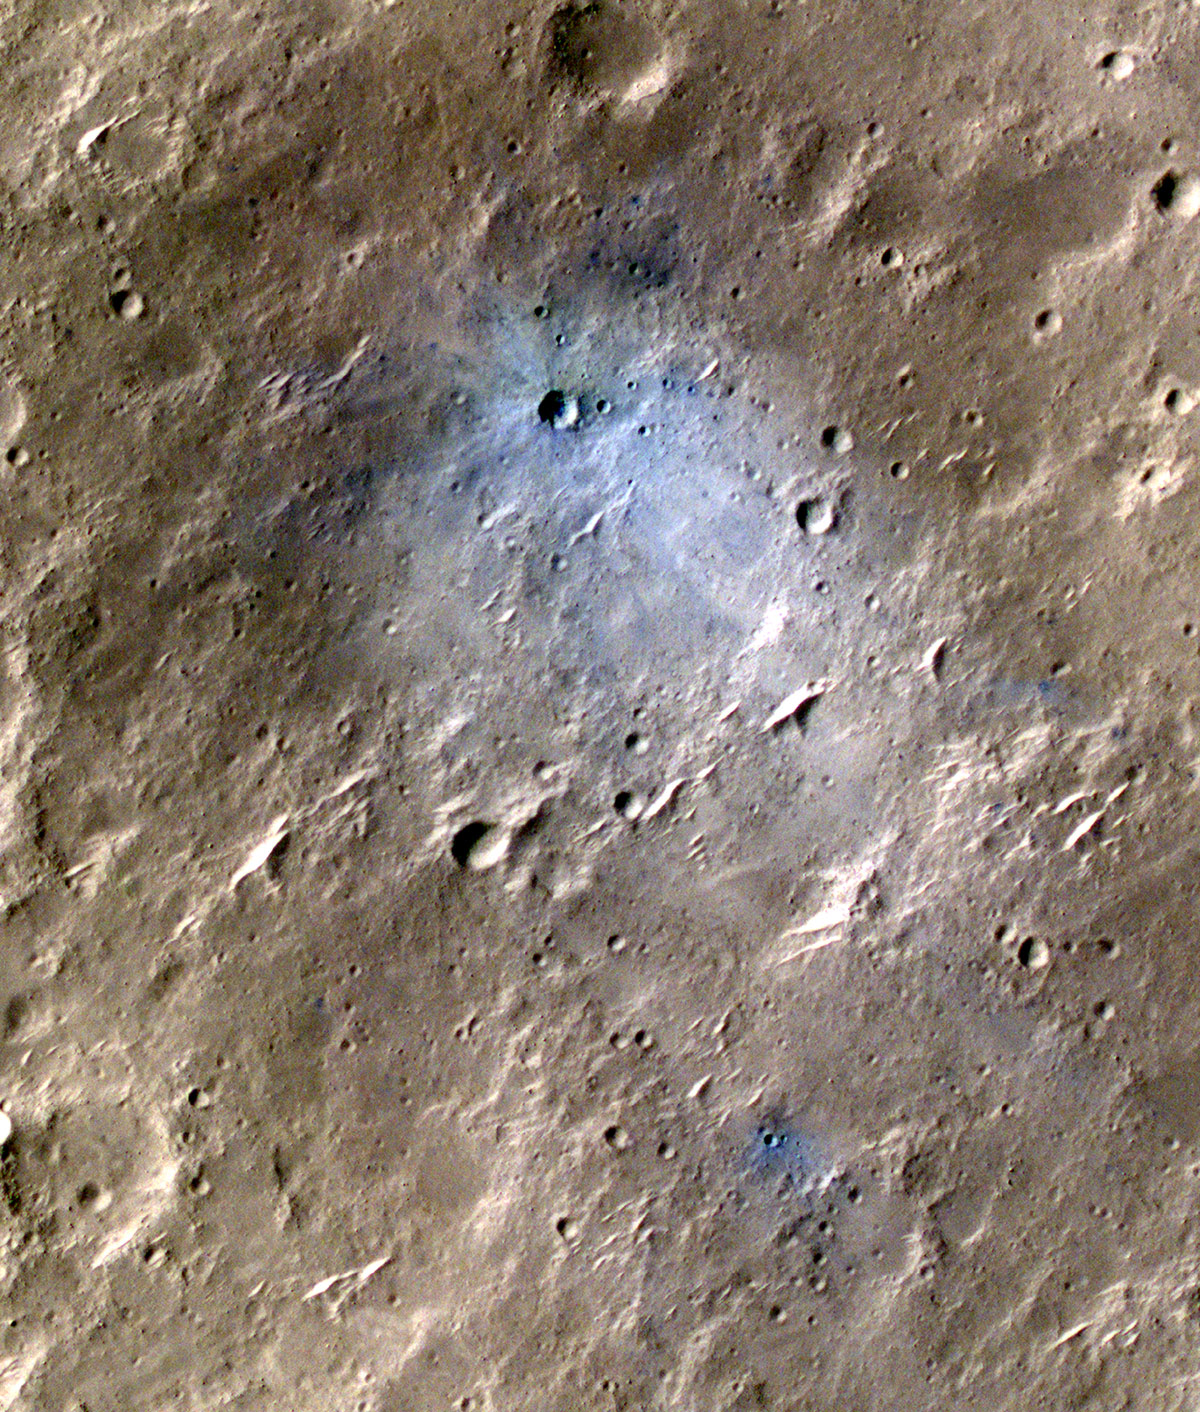 NASA’s Mars Reconnaissance Orbiter captured this image of a meteoroid impact that was later associated with a seismic event detected by the agency’s InSight lander using its seismometer. This crater was formed on May 27, 2020.